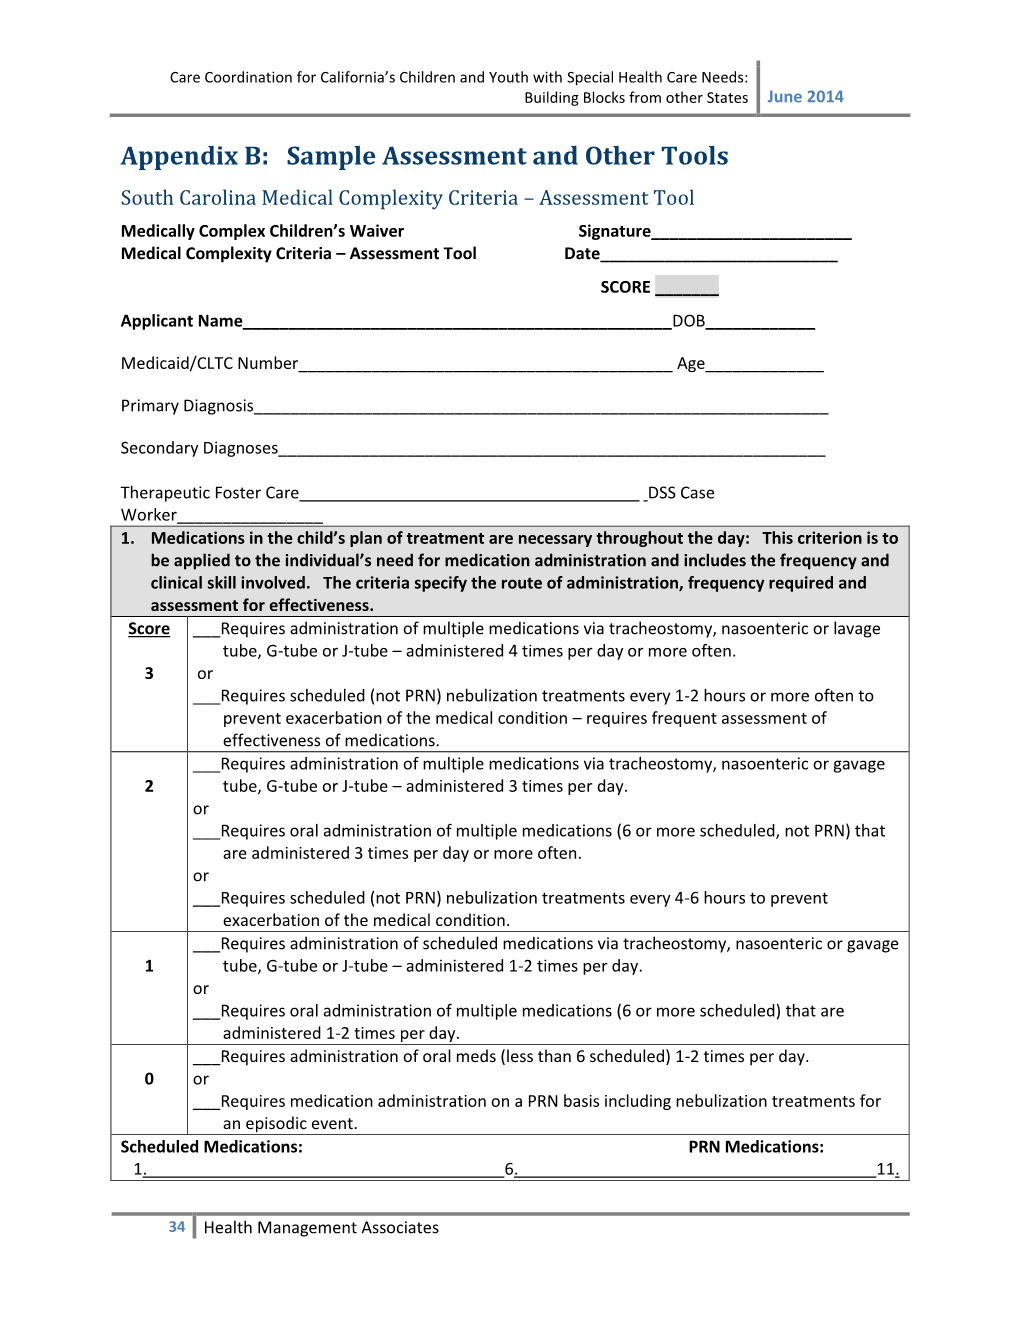 Appendix B: Sample Assessment and Other Tools